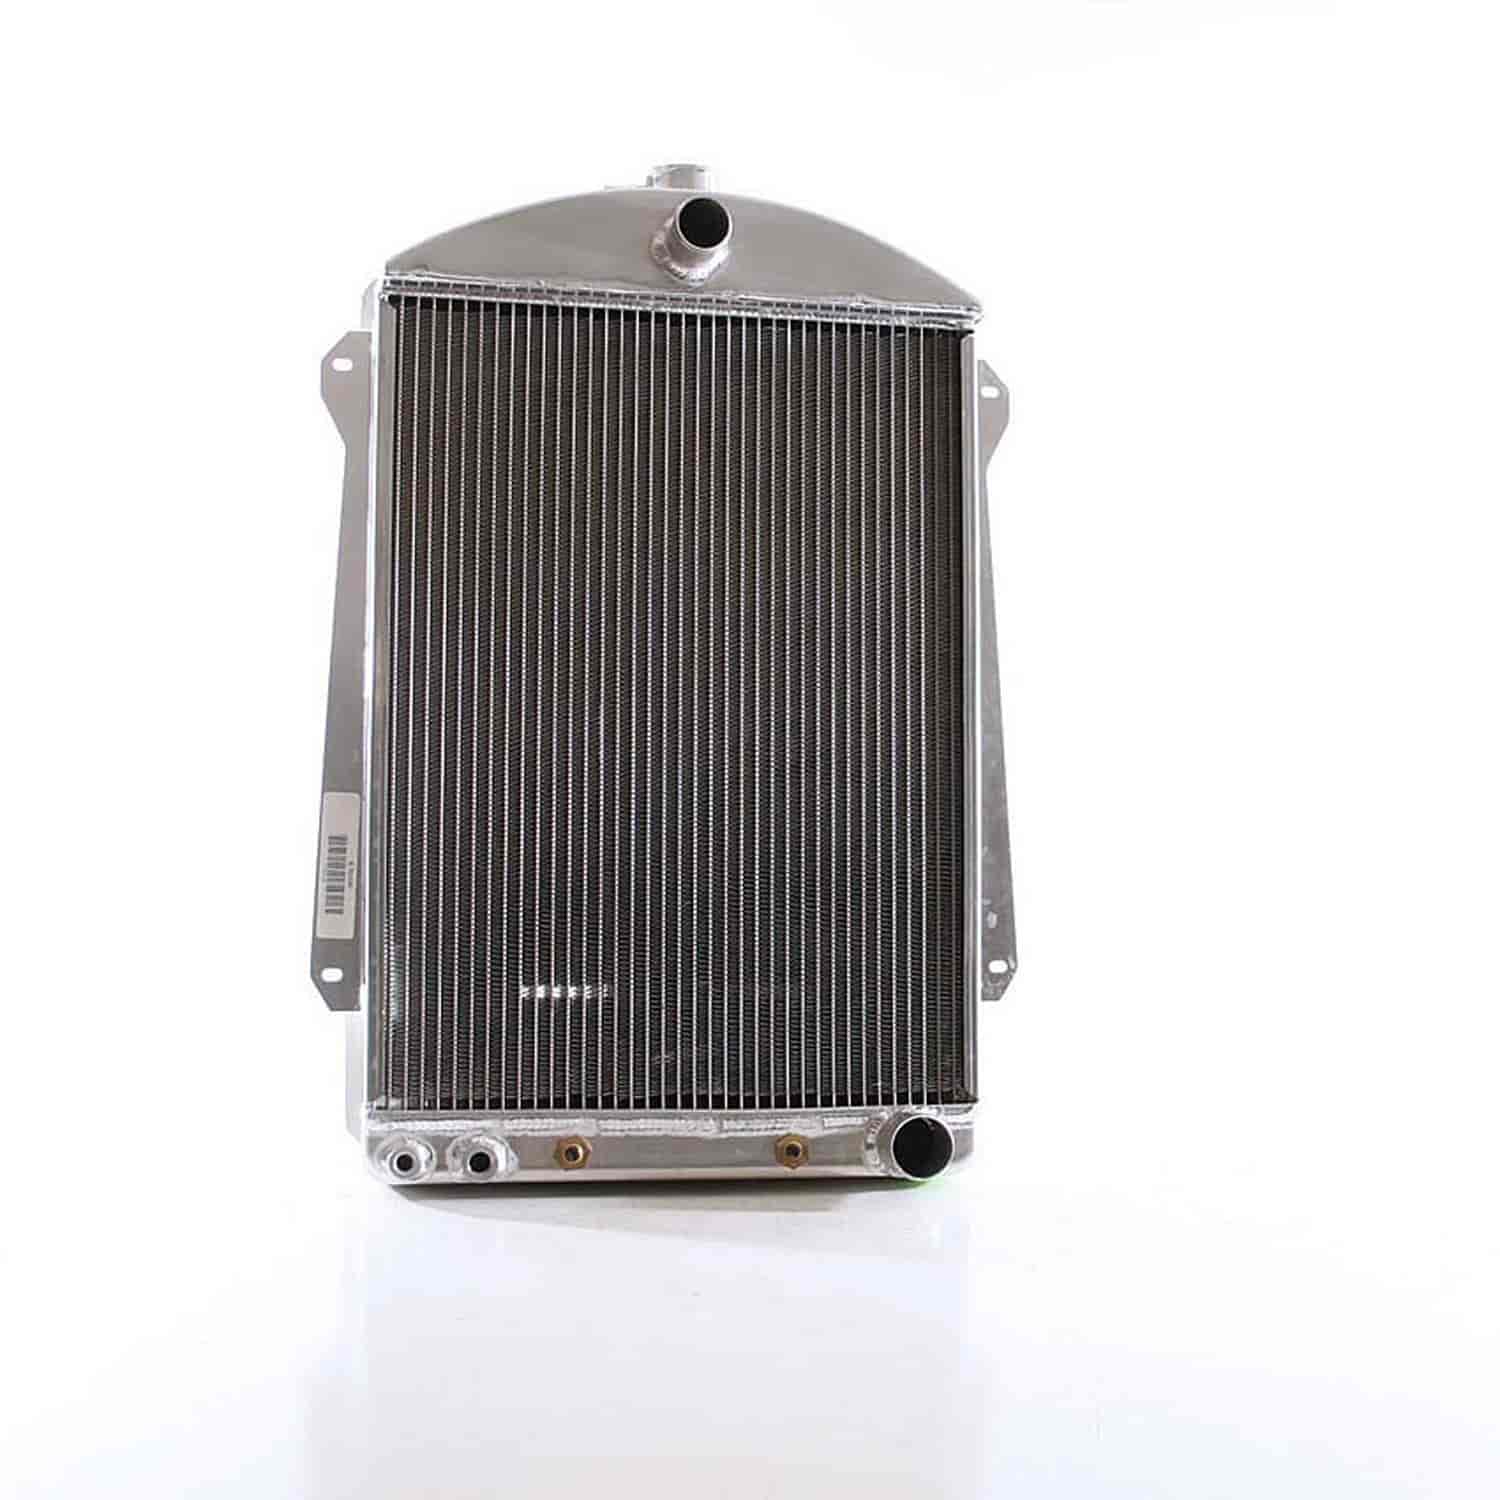 ExactFit Radiator for 1940-1941 Chevrolet Car with Transmission Cooler